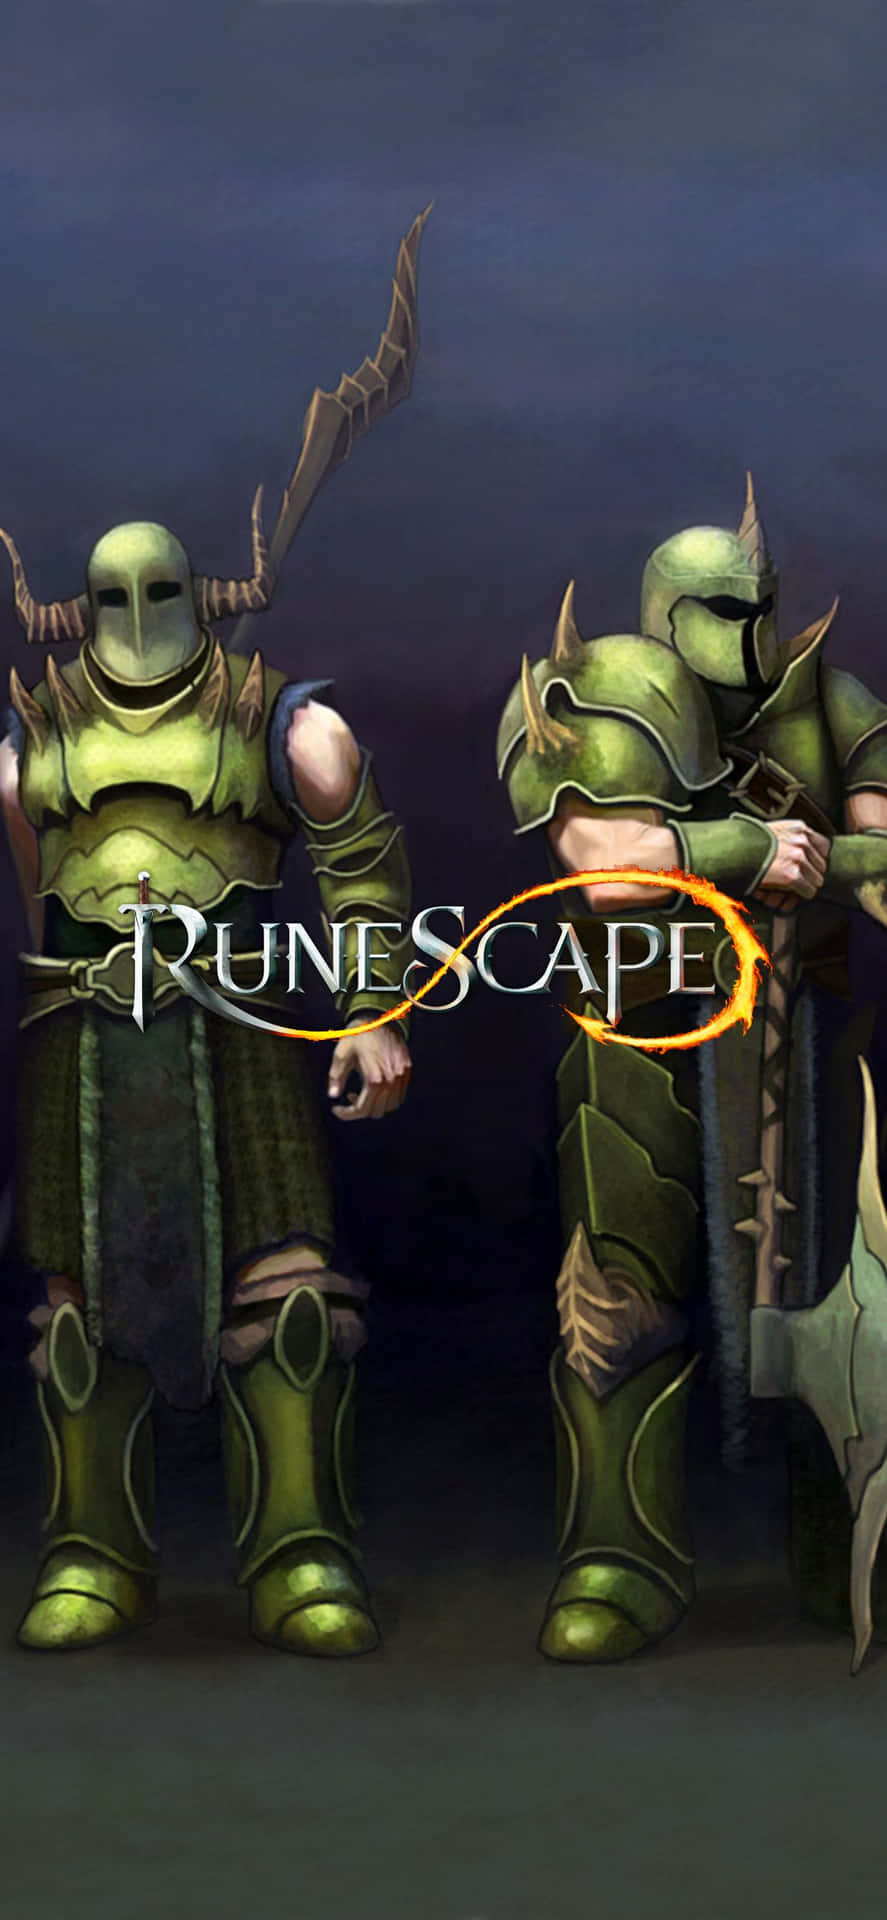 Unlock the new Iphone XS Max to explore the endless world of Runescape